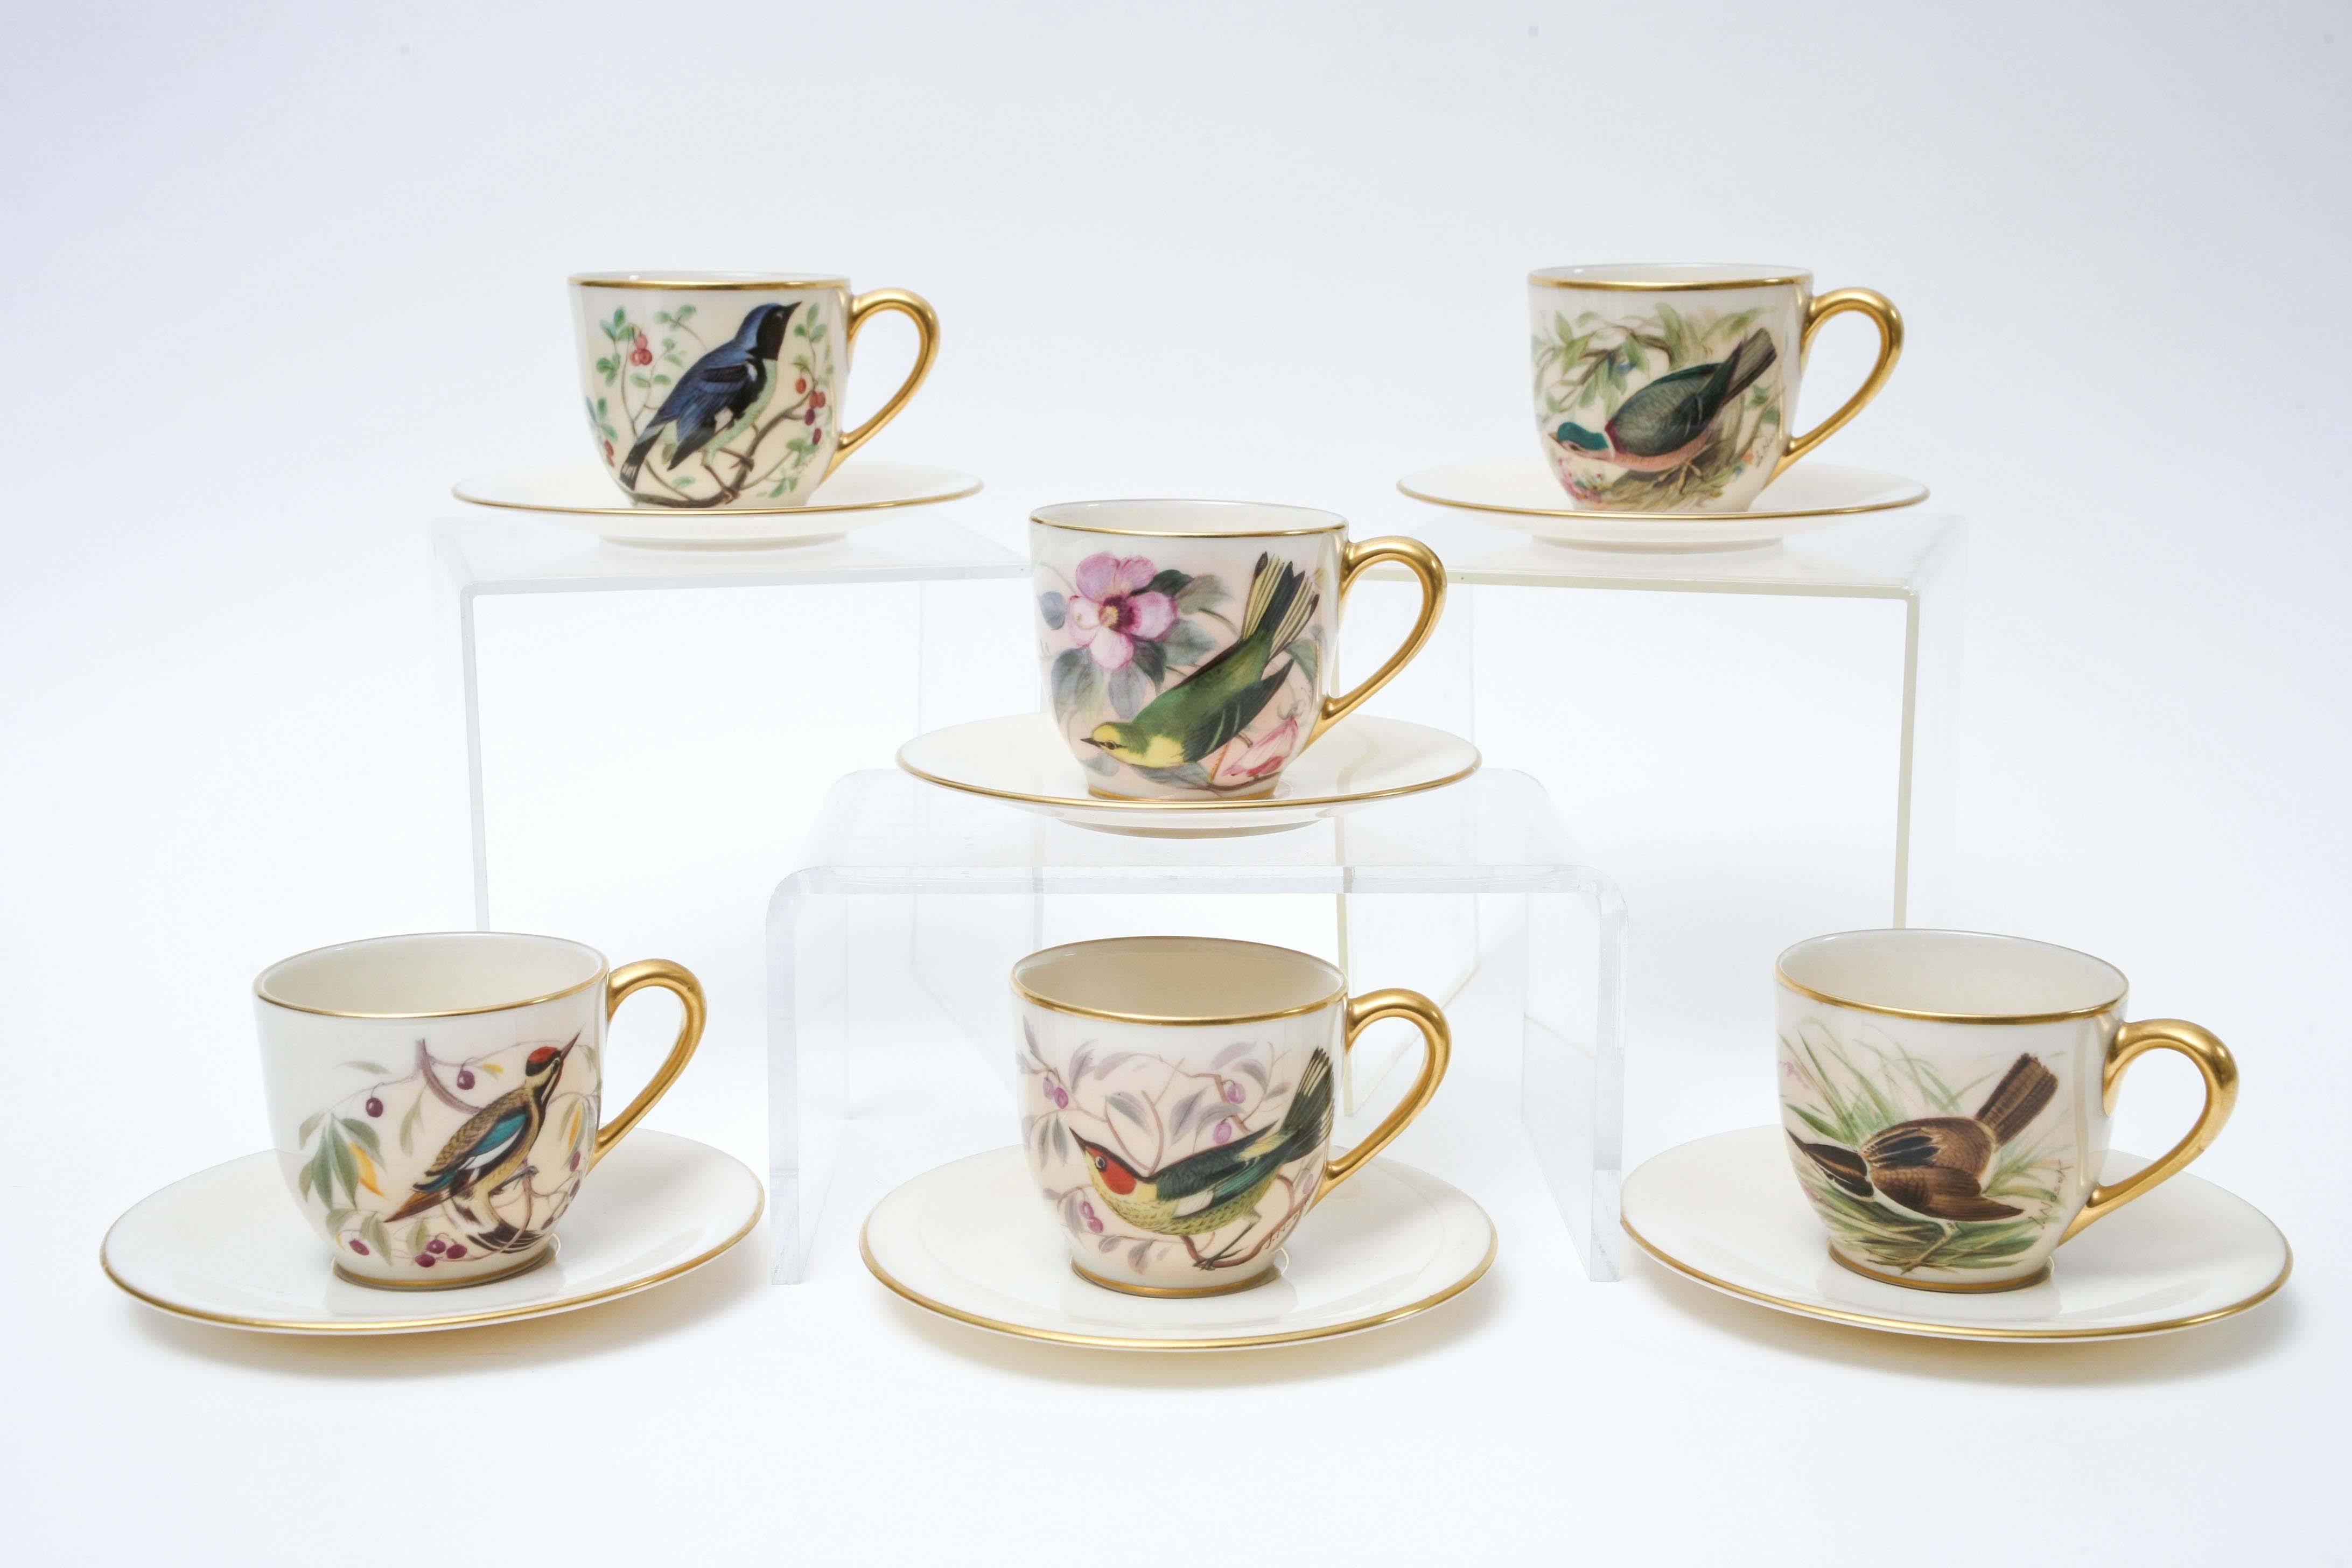 A set of six unique and whimsical demi tasse or after dinner coffee cup and saucers featuring a series of different birds hand-painted by Lenox's re known artist: Jan Nosek. These pieces are highly collectible and desirable due to the fact they are